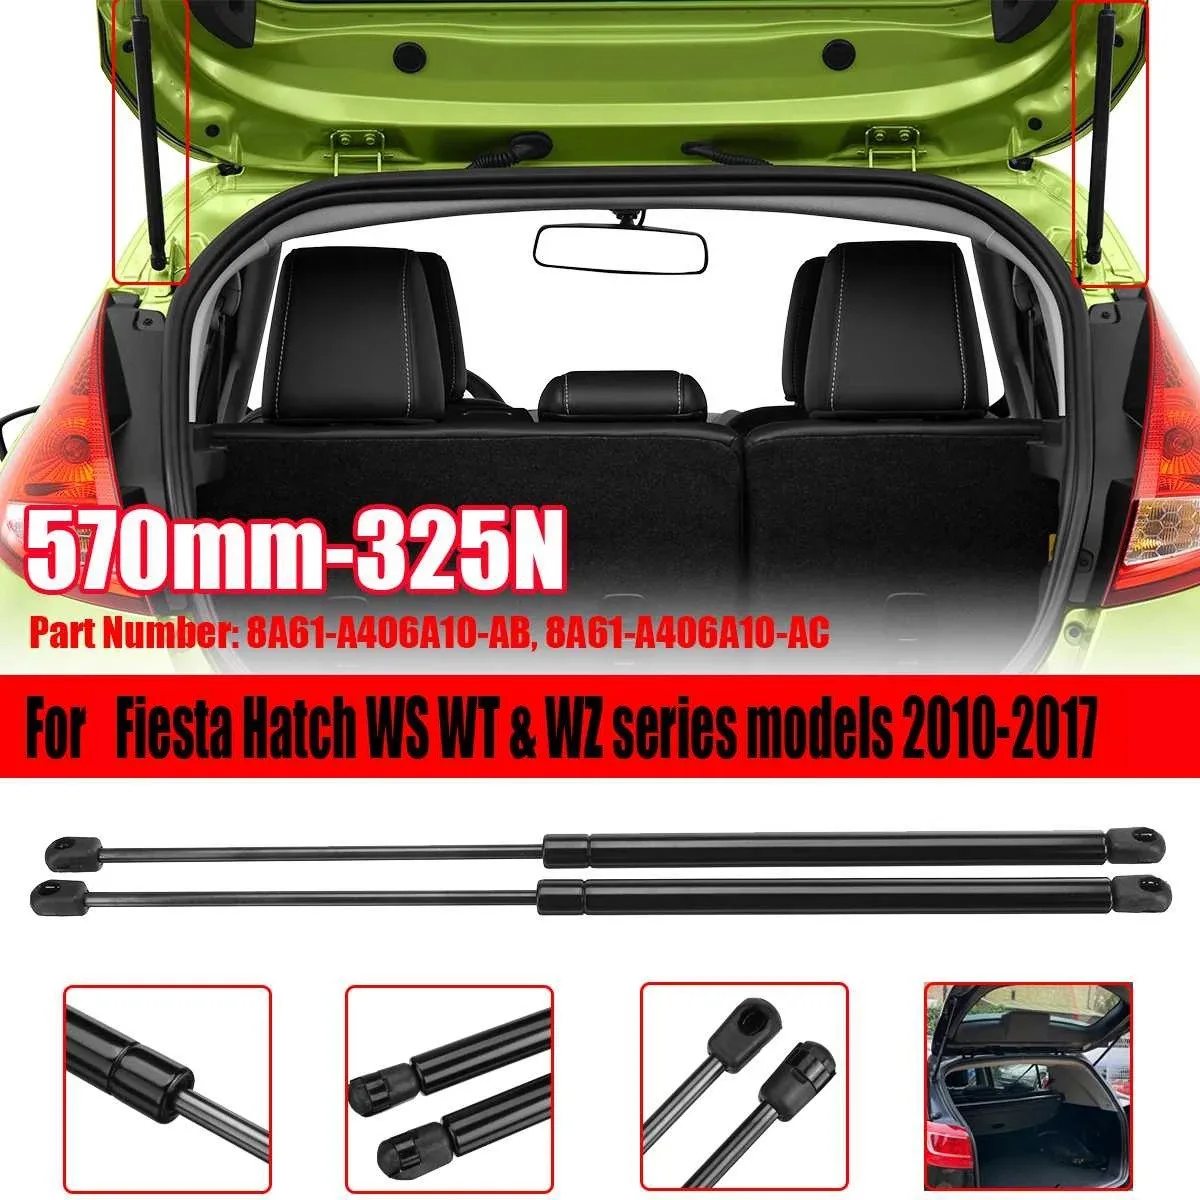 

2Pcs Car Tailgate Boot Gas Struts Lift Gas Spring for Ford Fiesta Hatchback WS WT WZ Series Models 2010-2017 570mm 325N